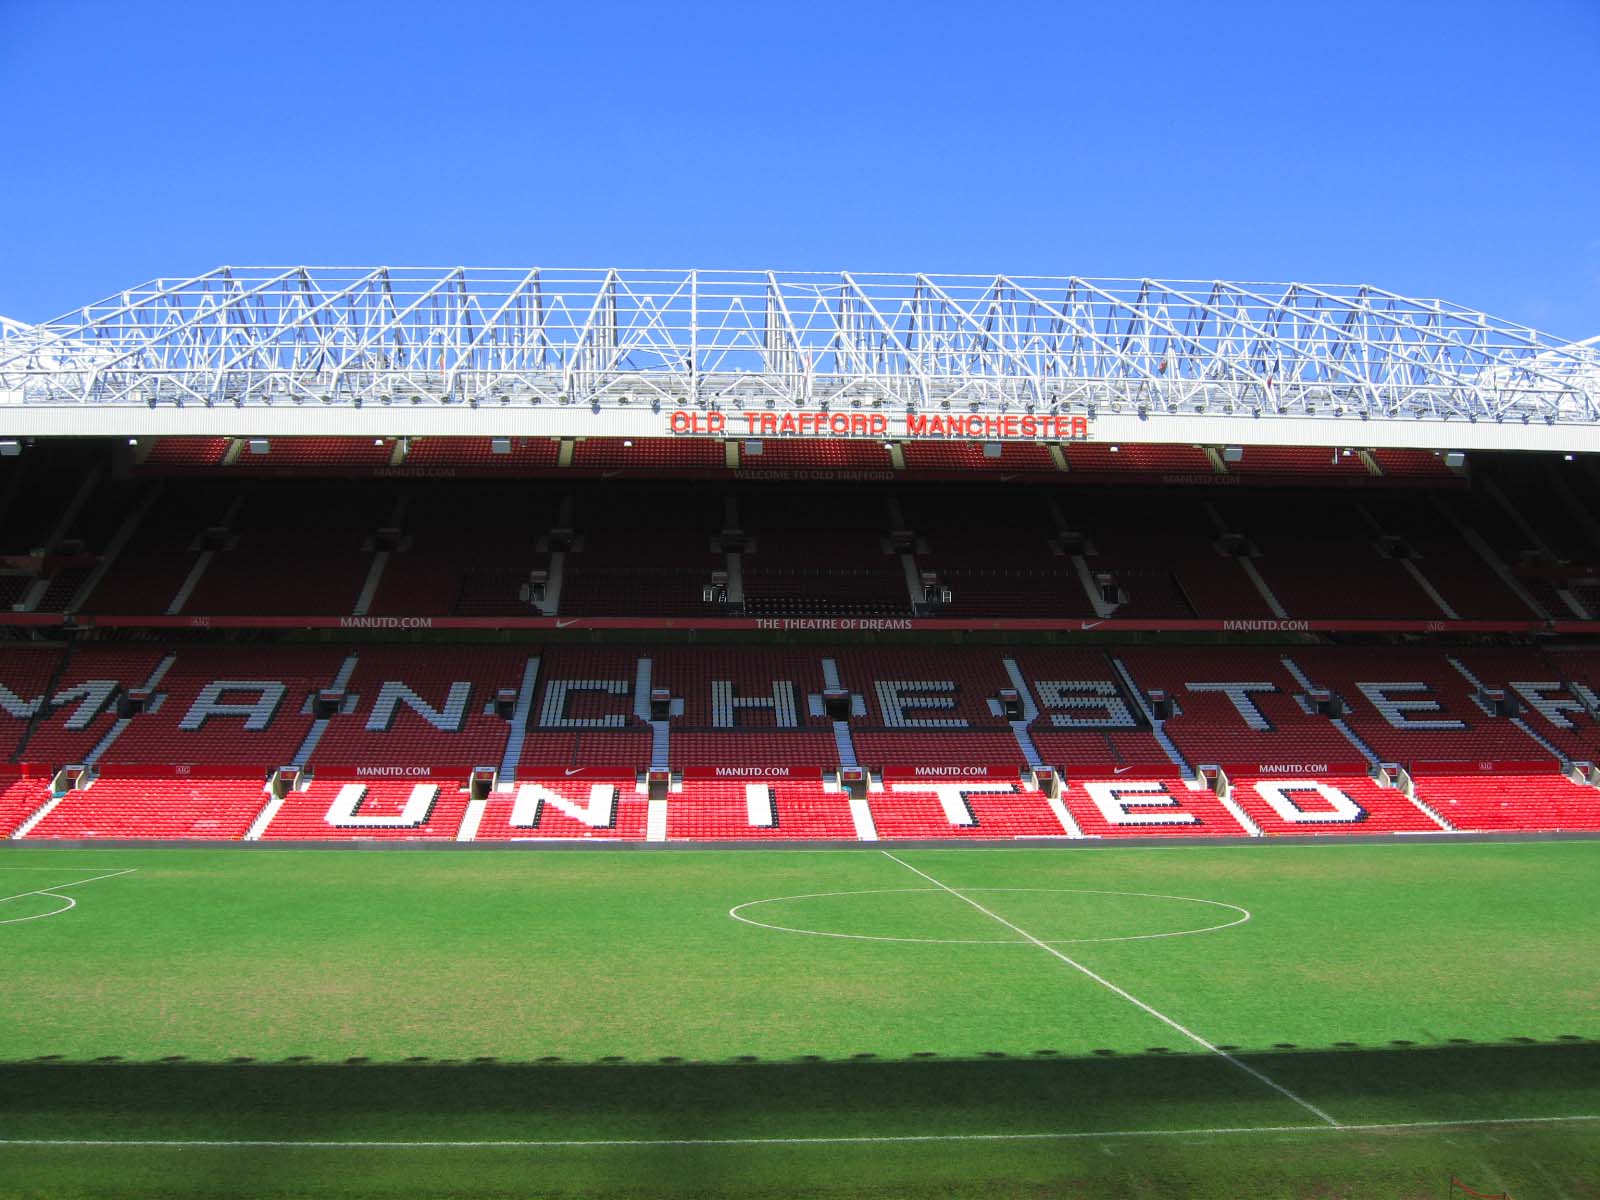 Manchester United: One of the most successful football clubs in history, with a rich legacy and storied past. Feast your eyes on the image we\'ve got for you, and get a glimpse of the power and glory that is Manchester United.